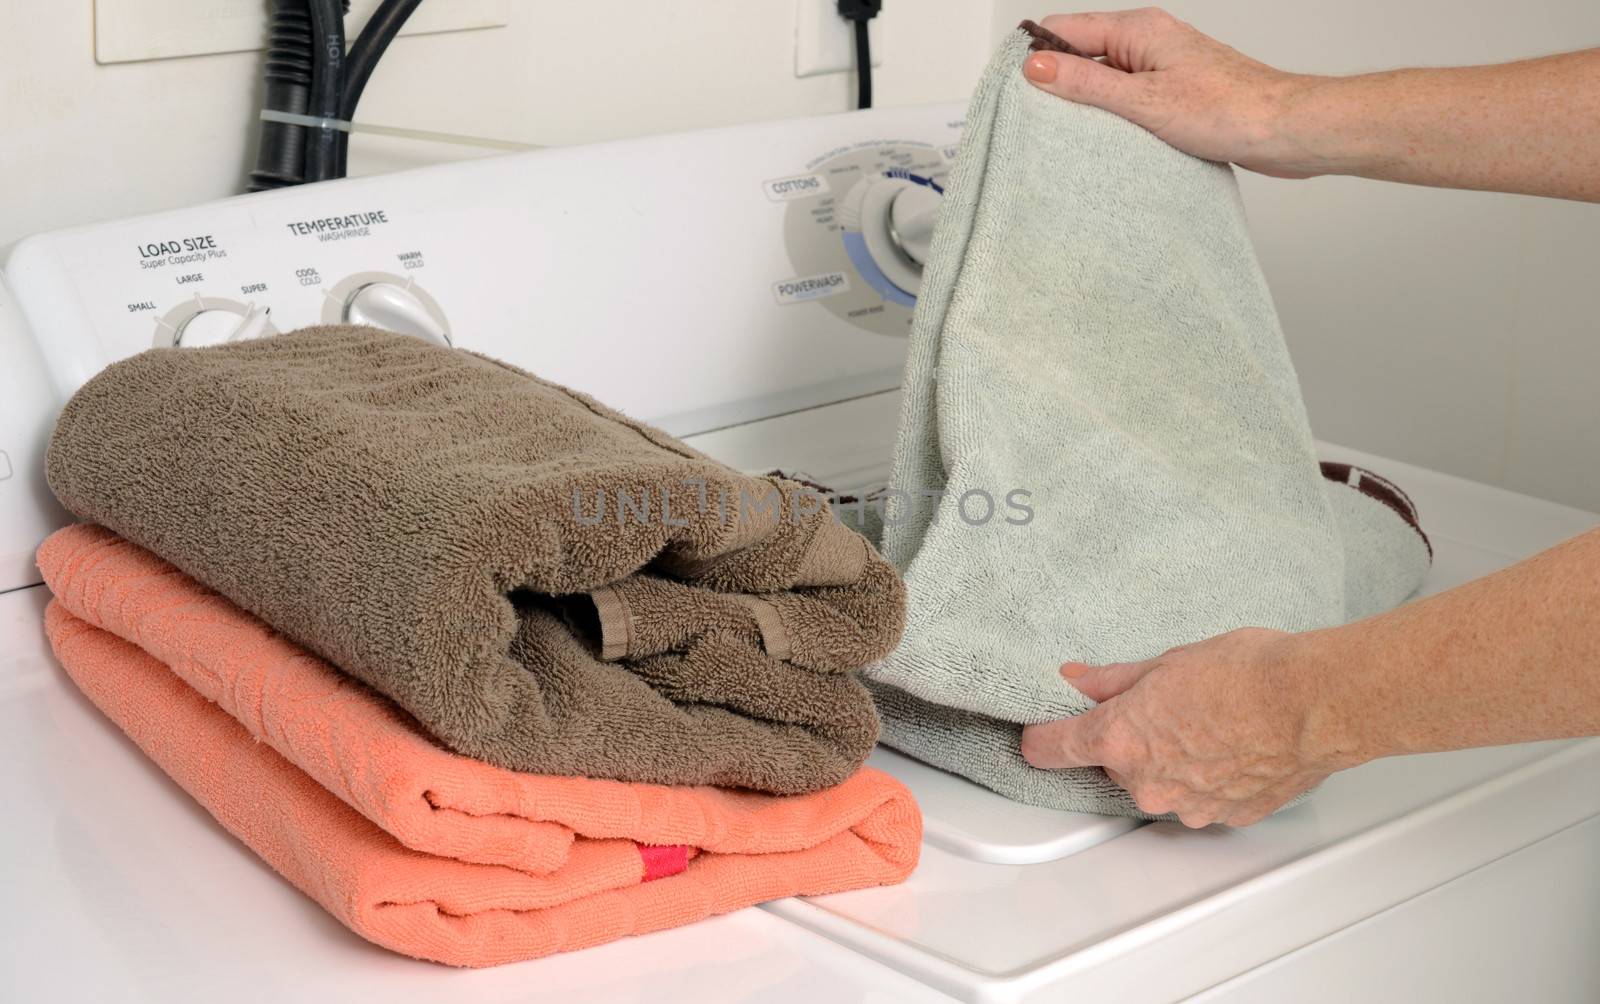 folding clean towels and laundry by ftlaudgirl